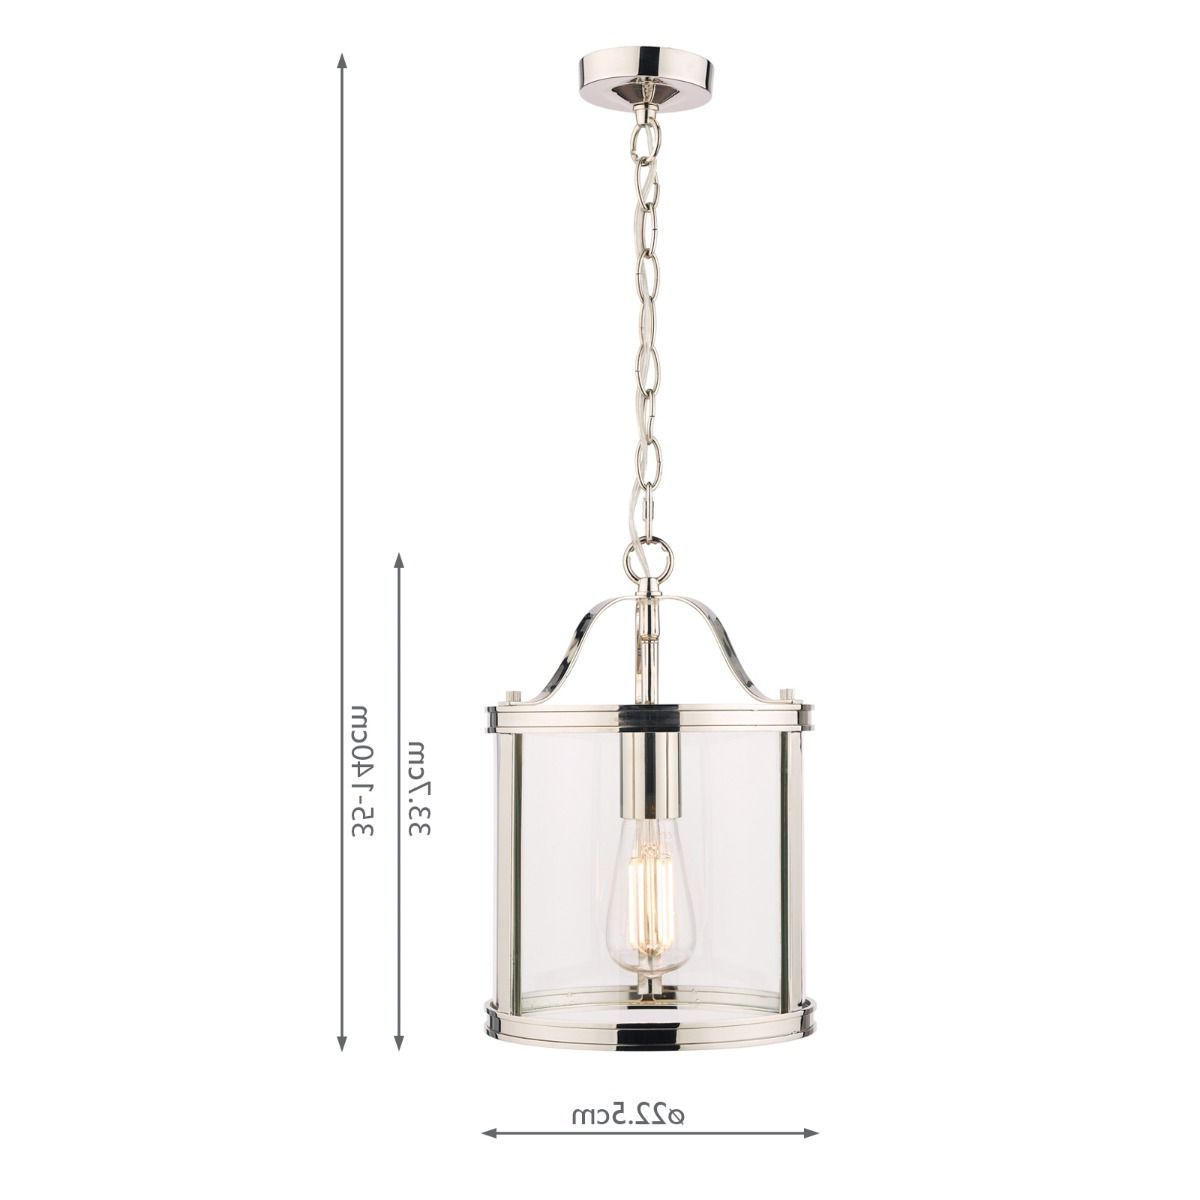 Laura Ashley Harrington Polished Nickel 1 Light Lantern Ceiling Light Throughout Most Recent Gild One Light Lantern Chandeliers (View 12 of 15)